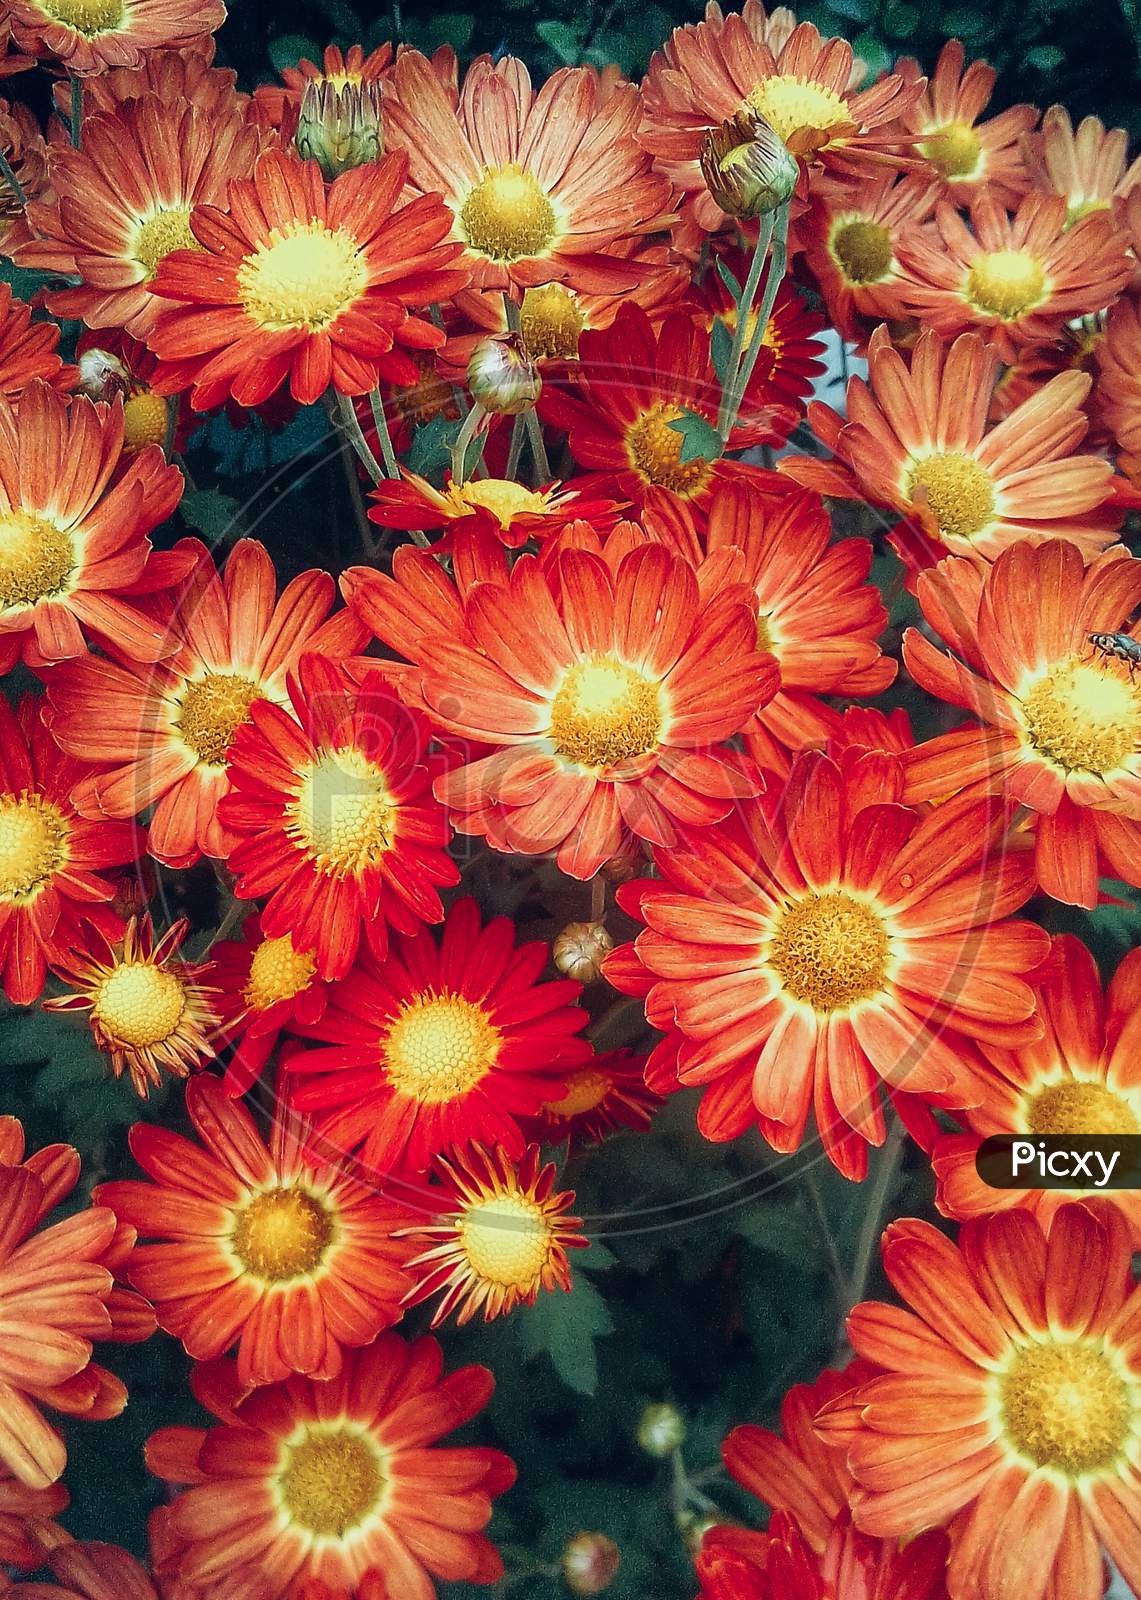 Red Daisy flowers